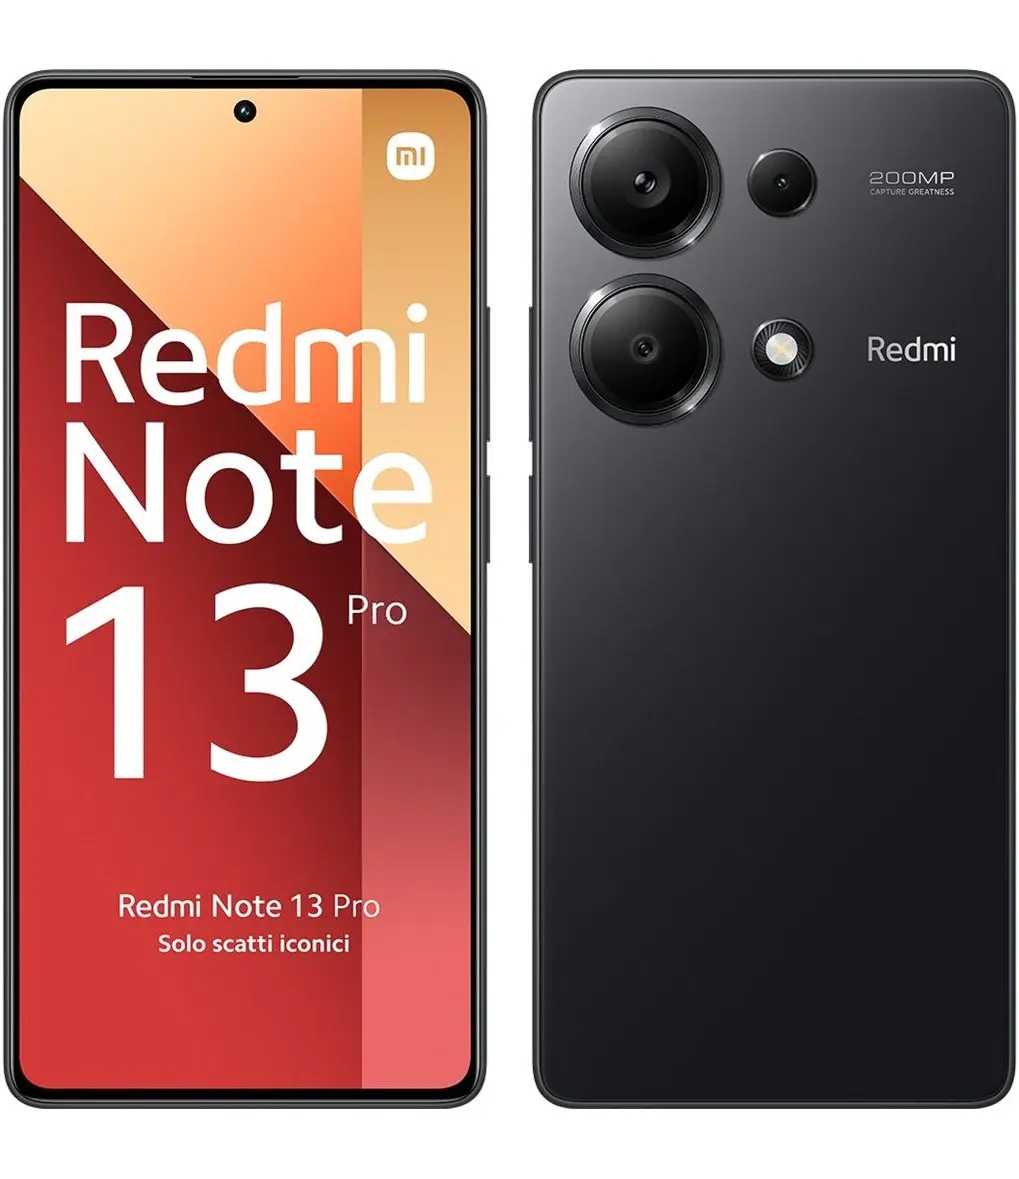 Xiaomi Redmi Note 13 Pro 4G - Full specifications, price and reviews